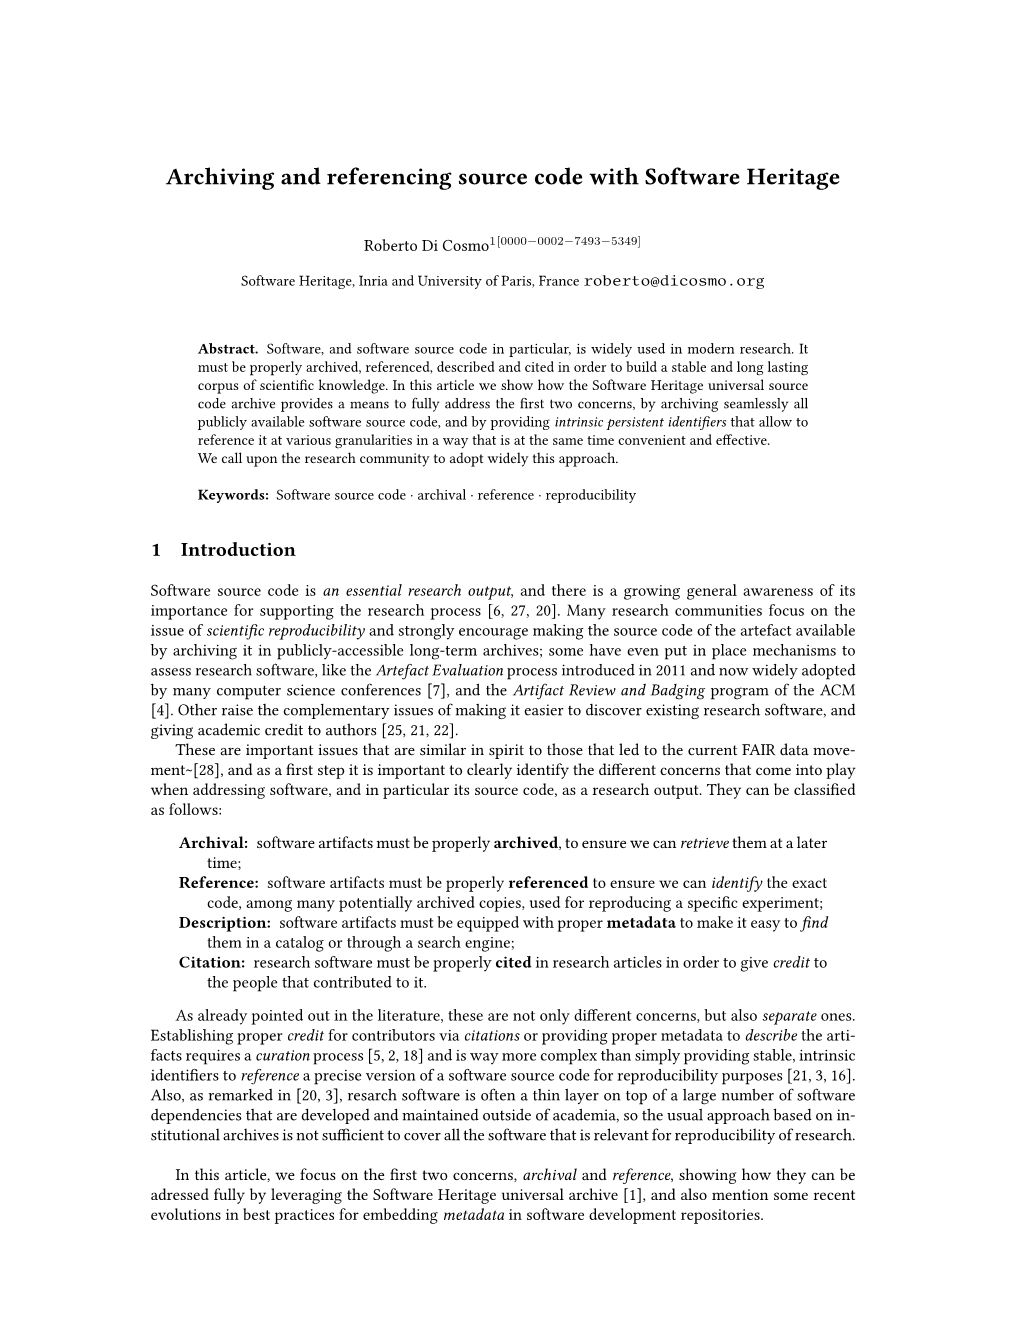 Archiving and Referencing Source Code with Software Heritage